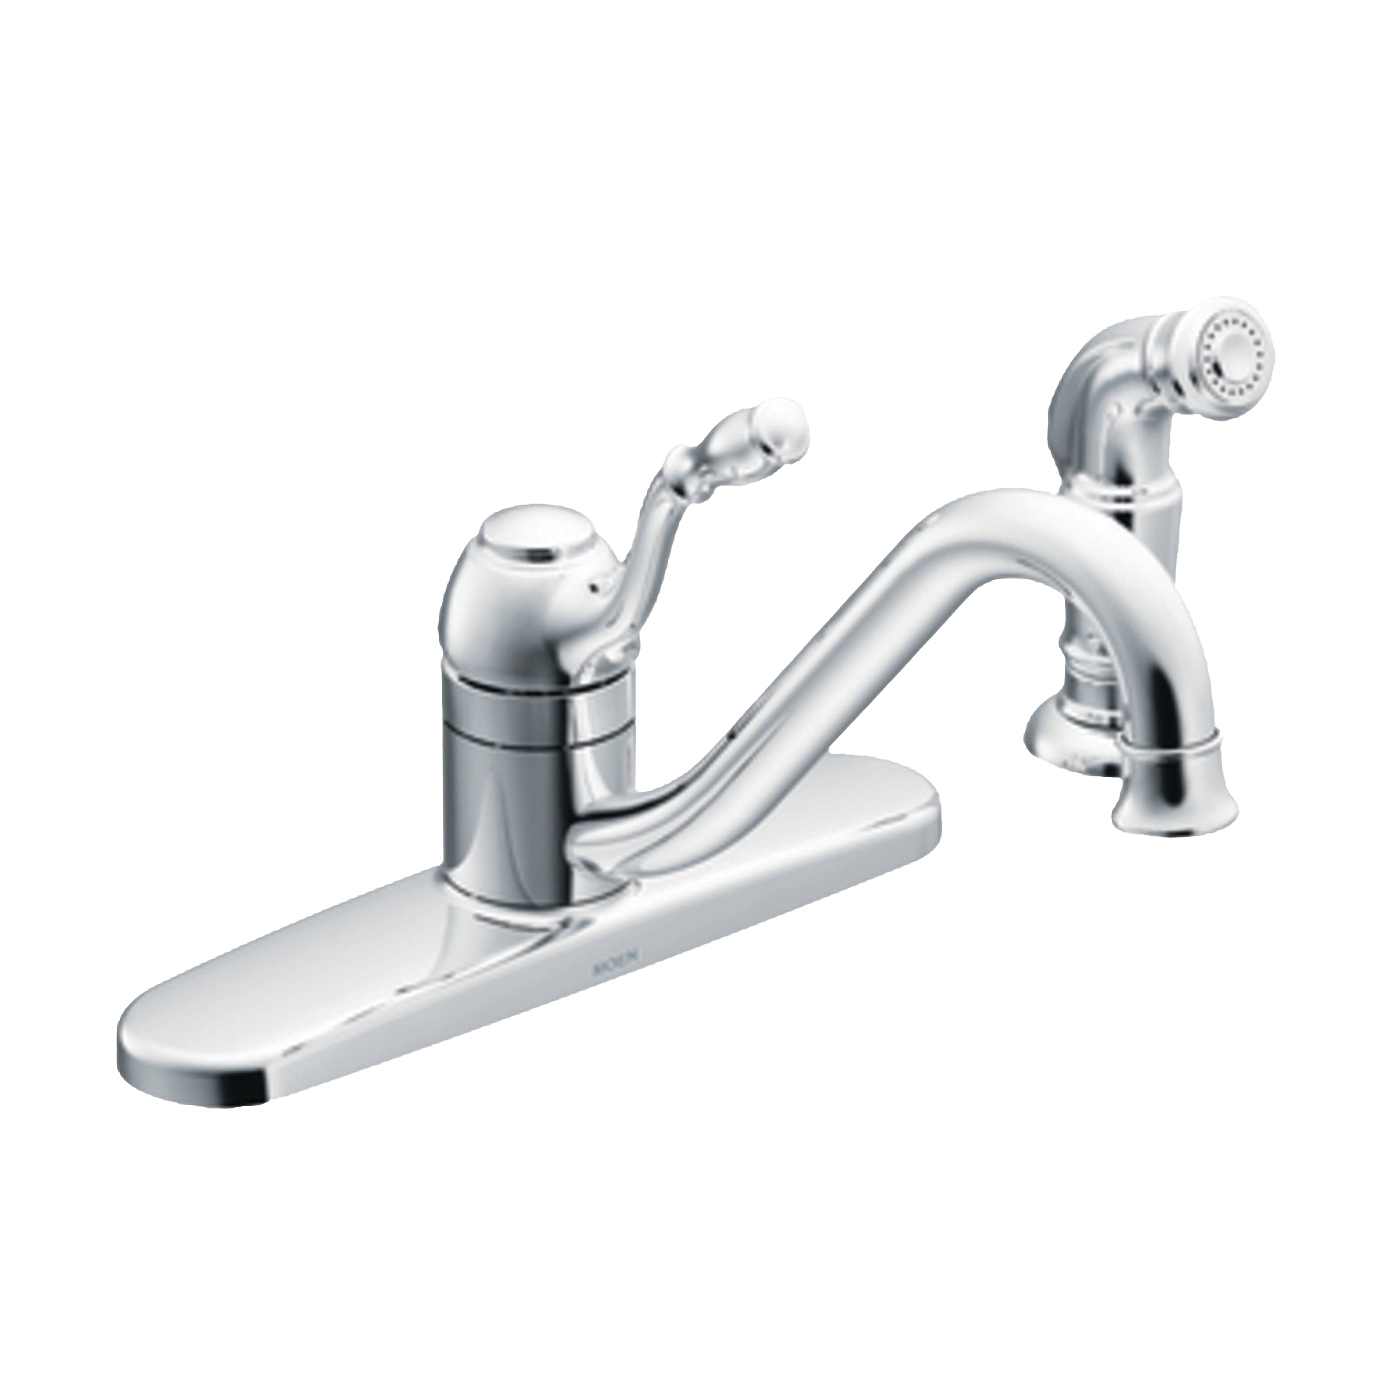 Lindley Series CA87009 Kitchen Faucet, 1.5 gpm, 1-Faucet Handle, Stainless Steel, Chrome Plated, Deck Mounting